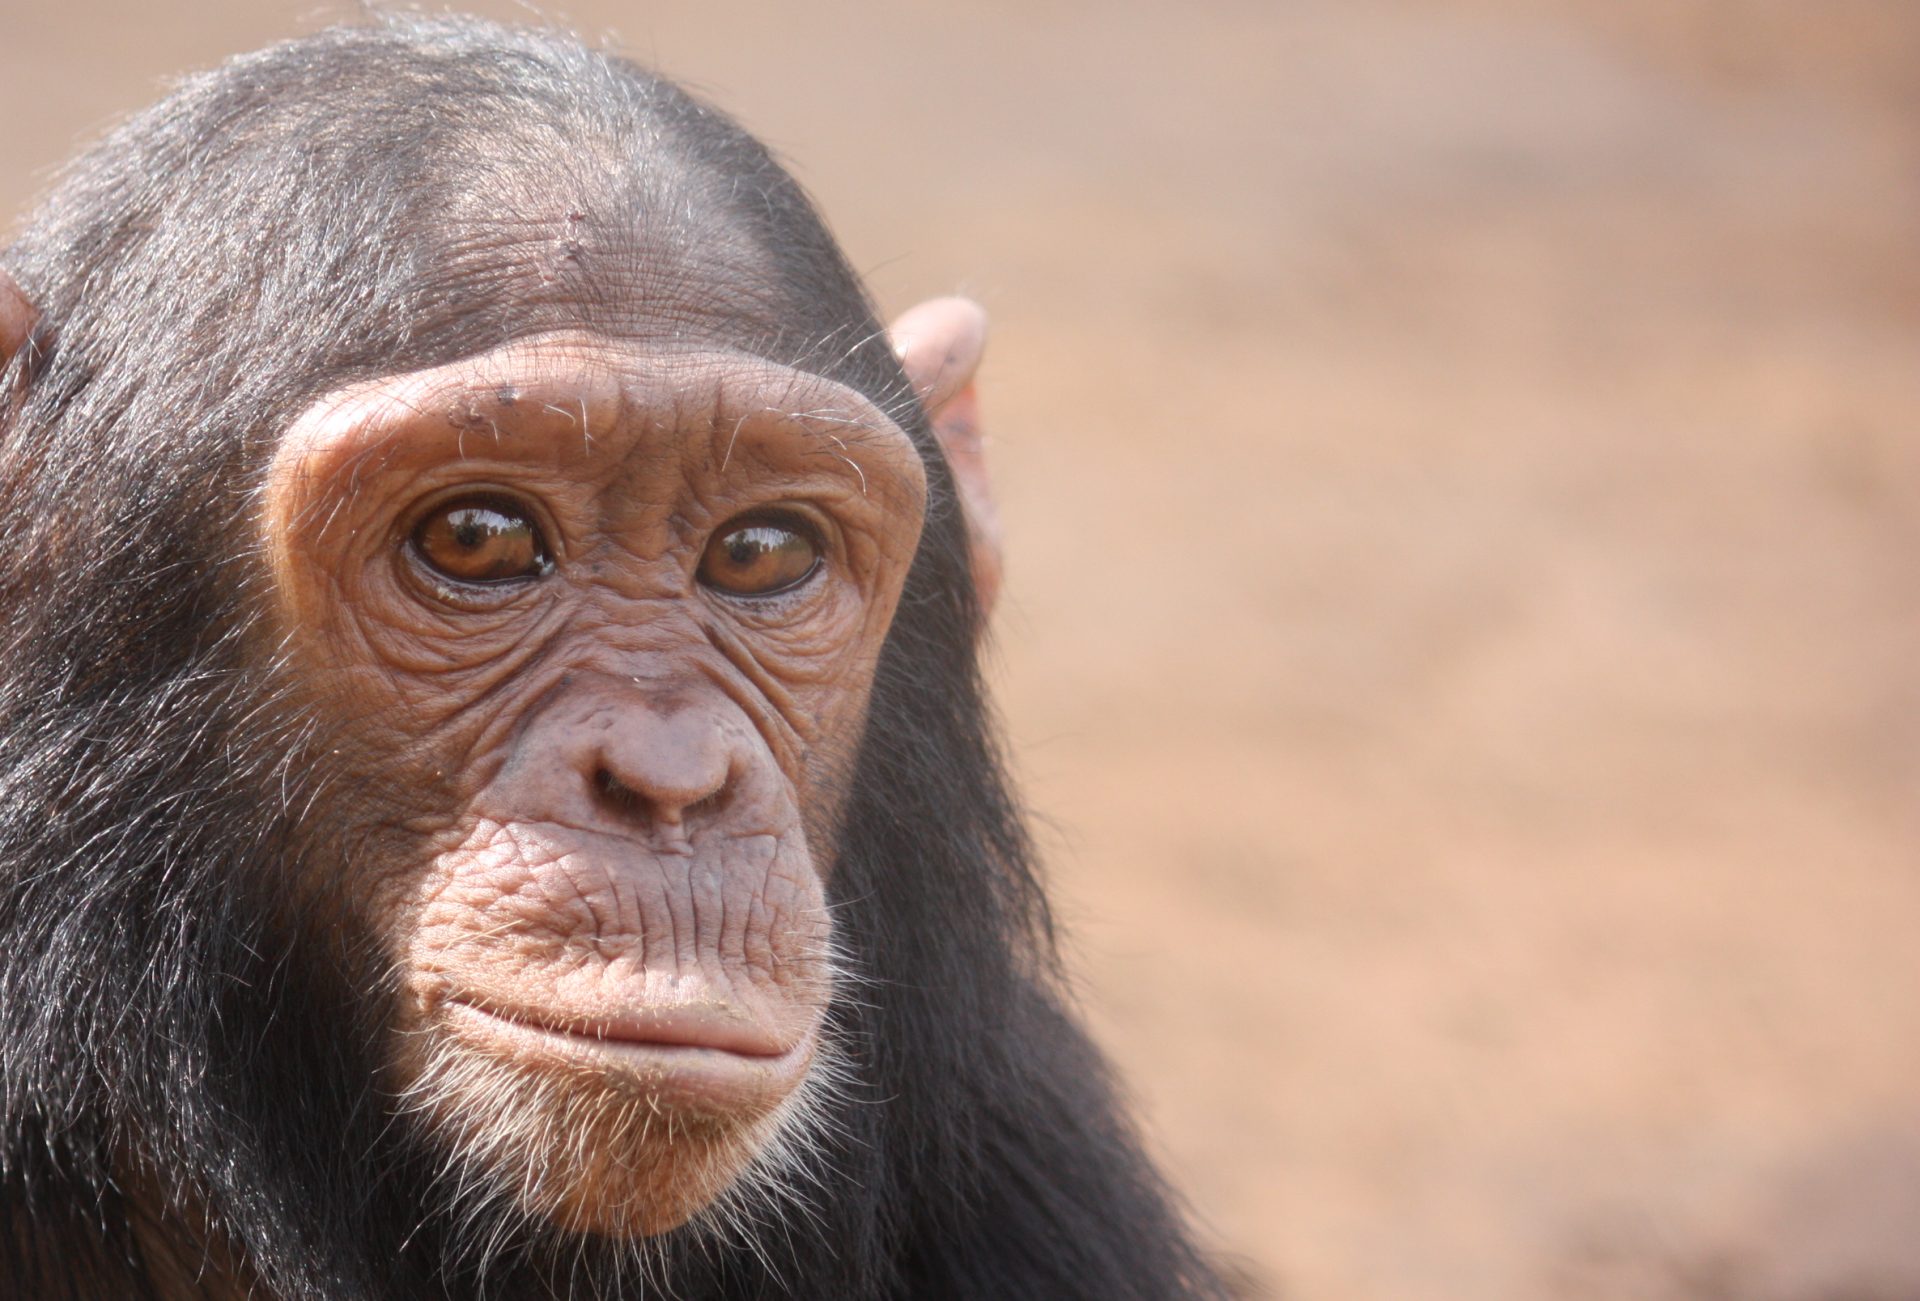 J.A.C.K. not only rescues chimps!